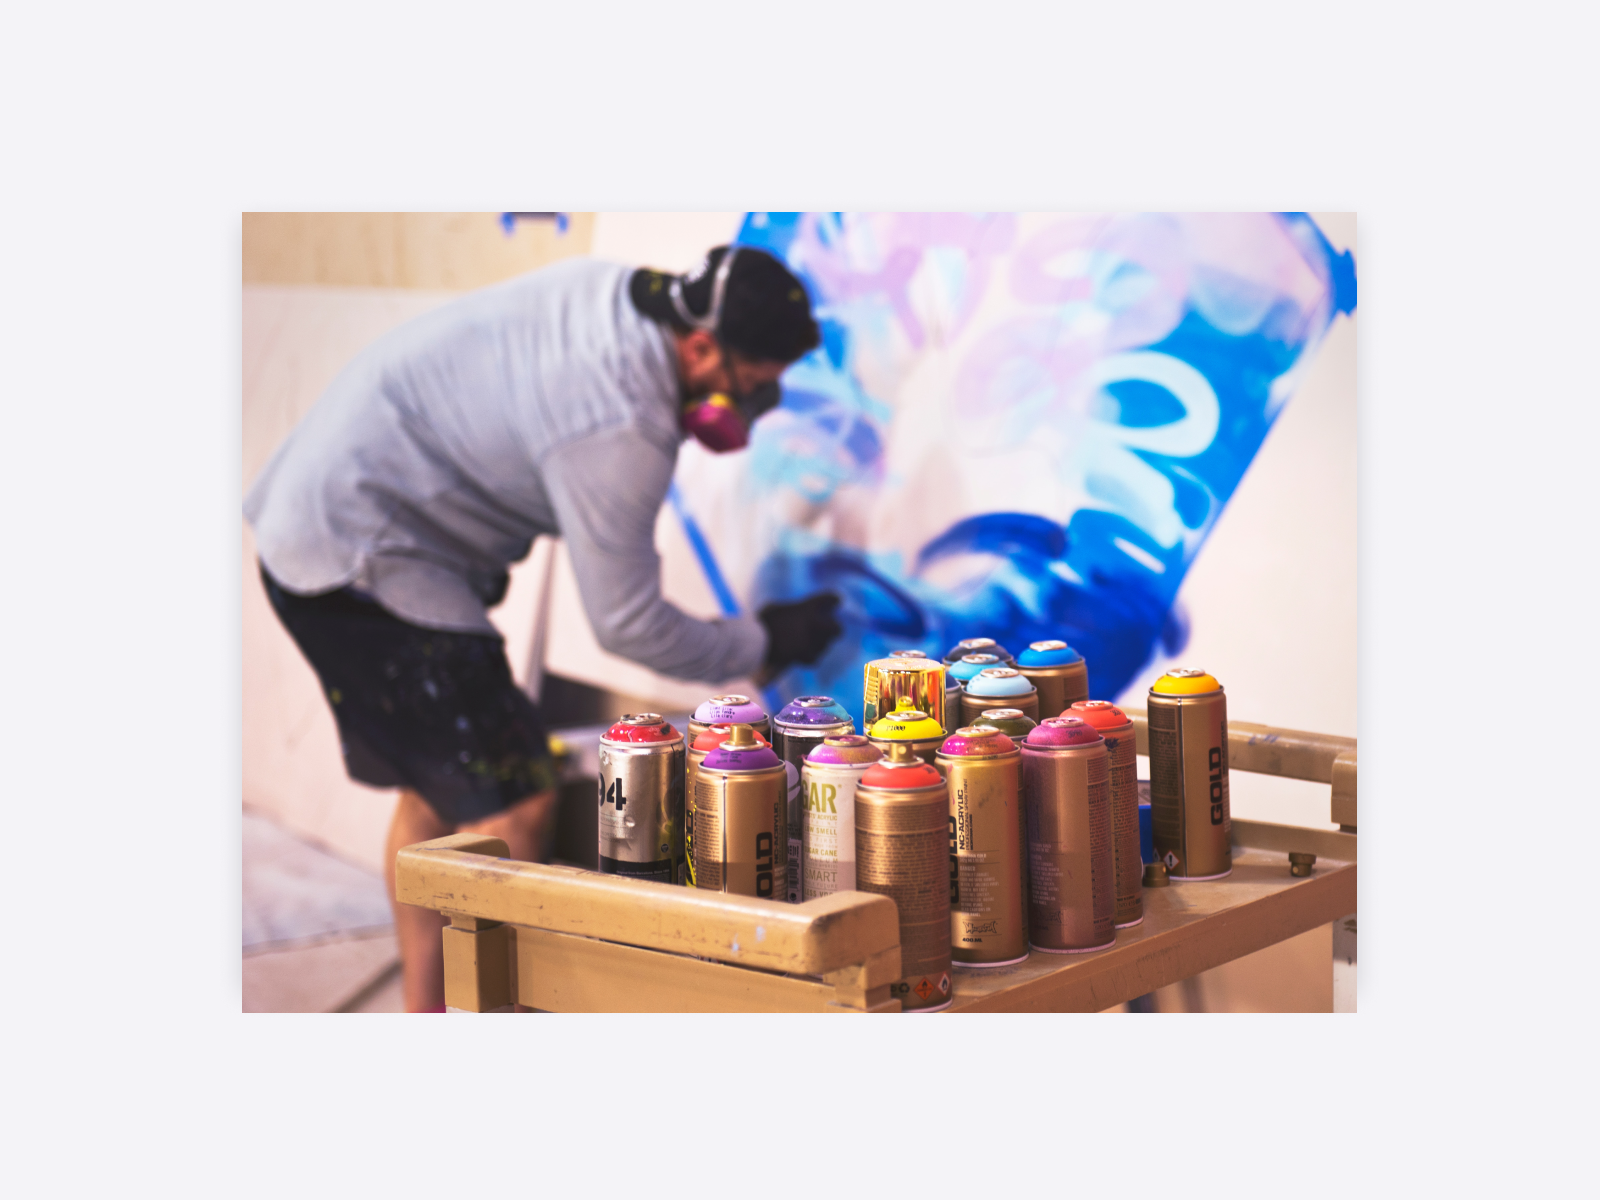 Illustration showing an artist creating artwork with spray paint.